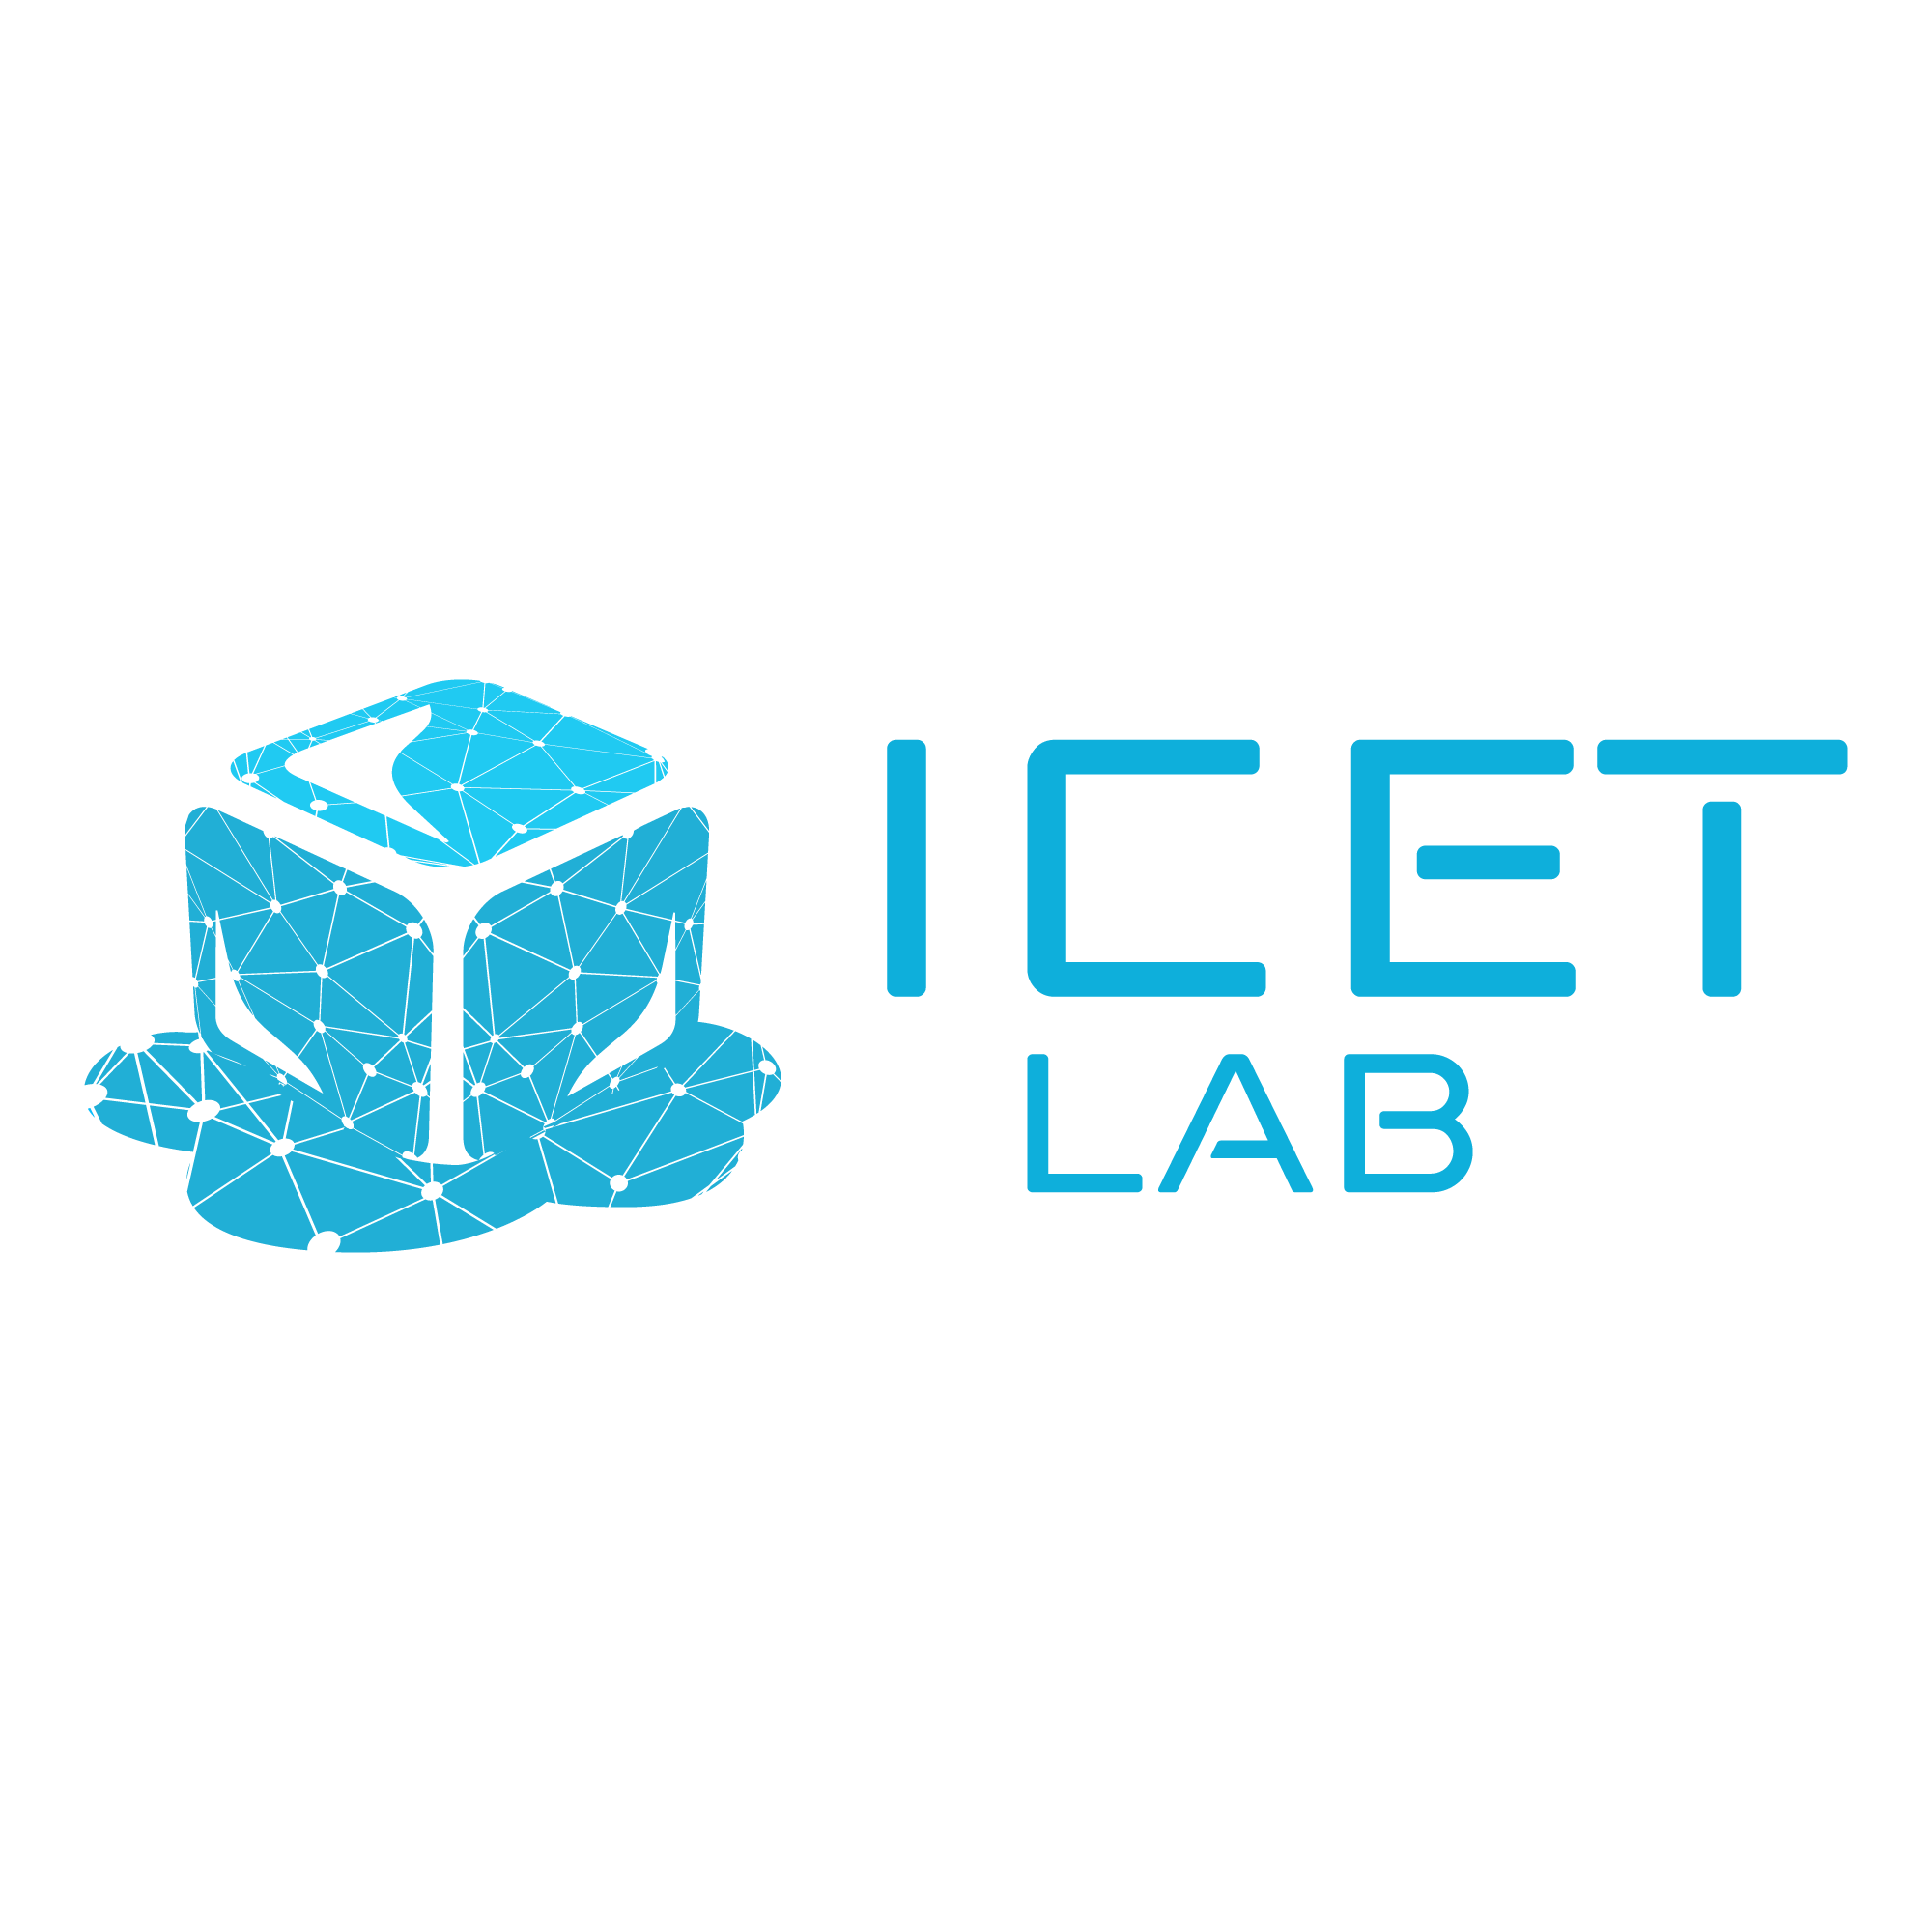 ICET-Lab-LOGO-A2.png